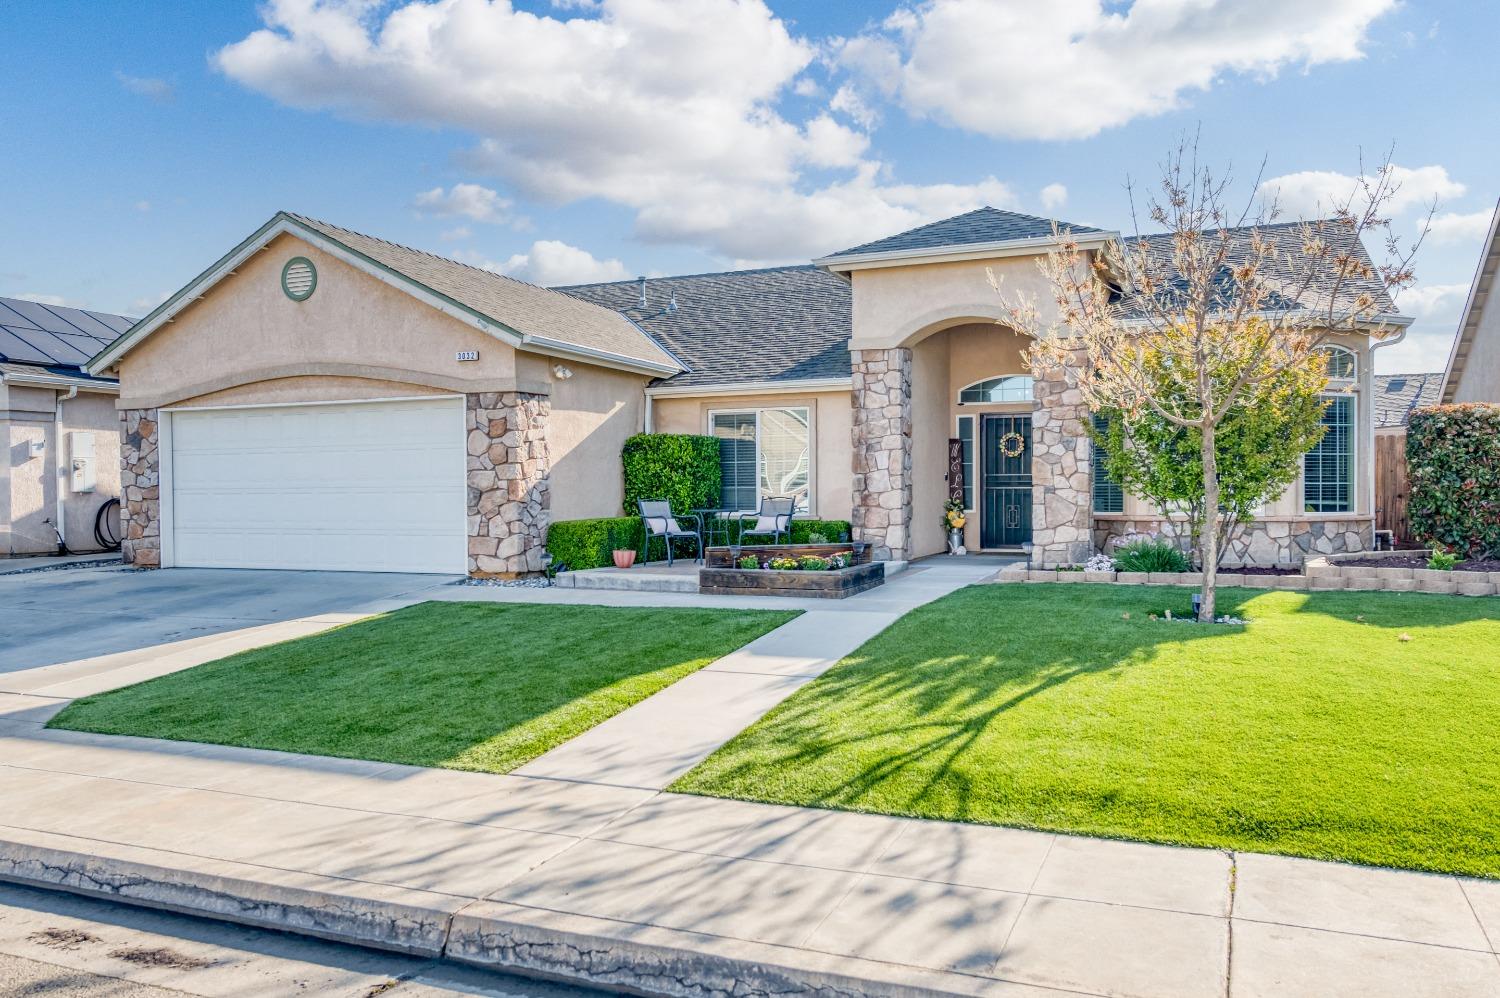 This is the one you've been looking for! For starters it's located in a great neighborhood in the award winning Clovis Unified school district. There is also a Neighborhood park right around the corner that includes a playground and a large grass area. When you walk in the front door of this home you will immediately notice the upgraded flooring throughout that leads you into a spacious open concept living room with a fireplace and vaulted ceilings, which is also open to the kitchen that features granite counter tops, eating bar, pantry, and a dining area that leads out to the backyard covered patio. The home features 4 large bedrooms including a 5th room that can be used as a second living space, formal dining room, playroom, or whatever you heart desires. The large master bedroom has backyard access, a walk in closet, master bath with dual sinks, a soaking tub, and a separate shower. The front and backyard are well maintained with Synthetic lawn and raised flower beds, perfect for those looking for low maintenance landscaping. There was Govee outside LED holiday lighting installed in Nov of 2023. Did I mention the home also has owned solar! The 26 panels where just installed in Dec. of 2023. This home truly represents tasteful design and pride in ownership, don't miss your chance to make this home yours!